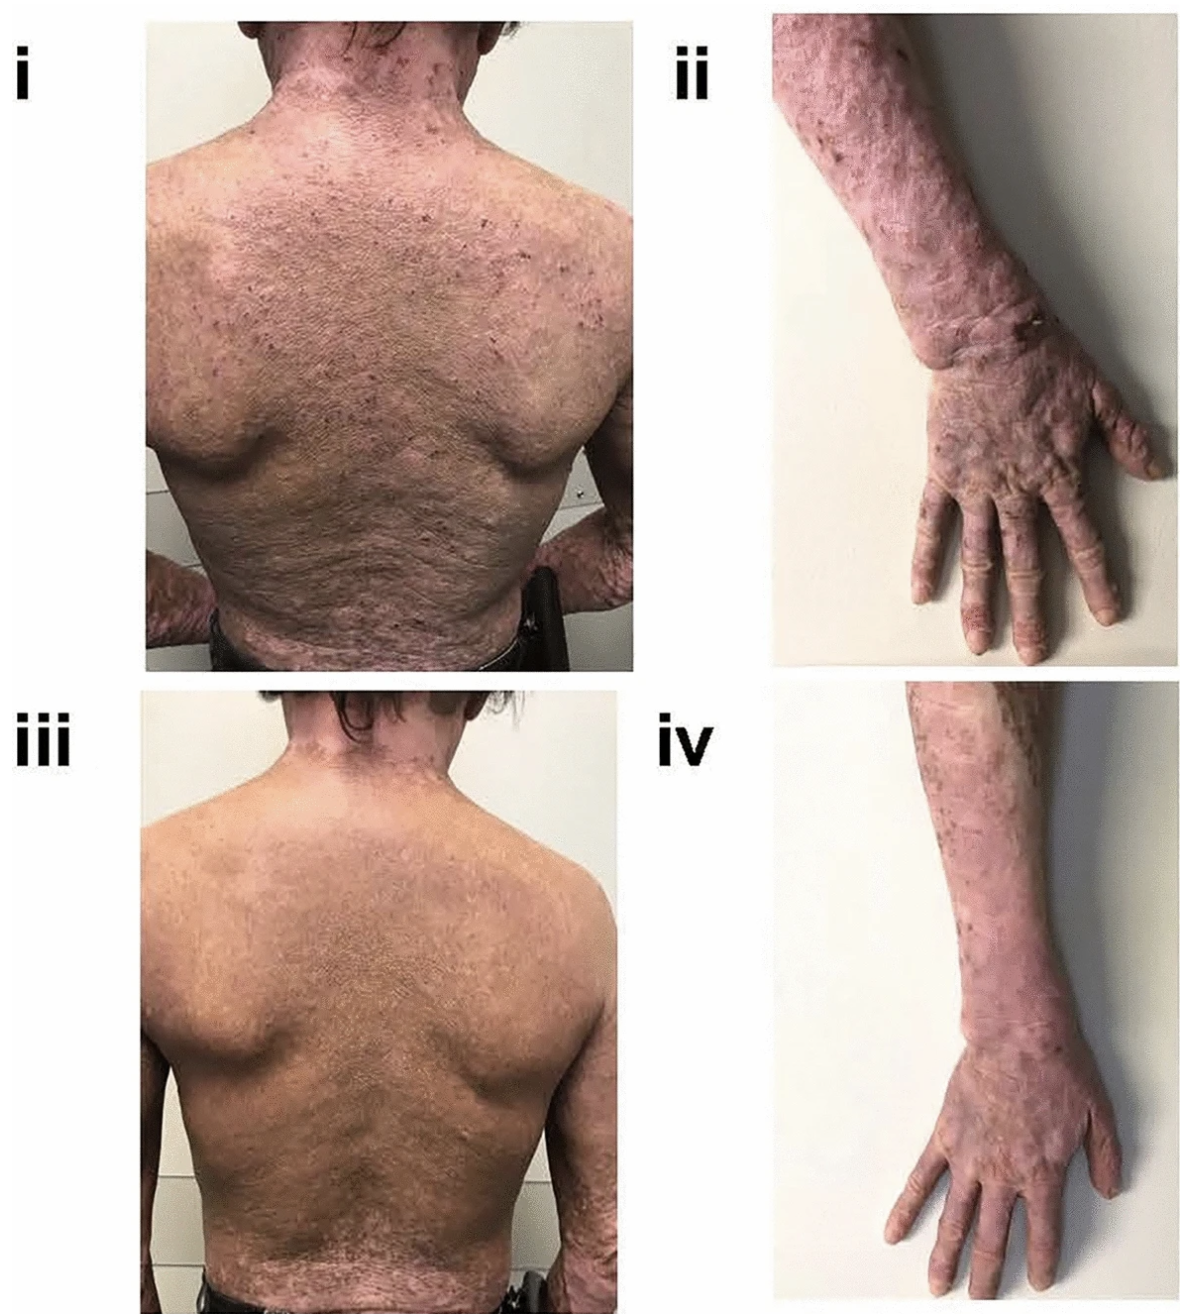 Sever atopic dermatitis before and after dupilumab